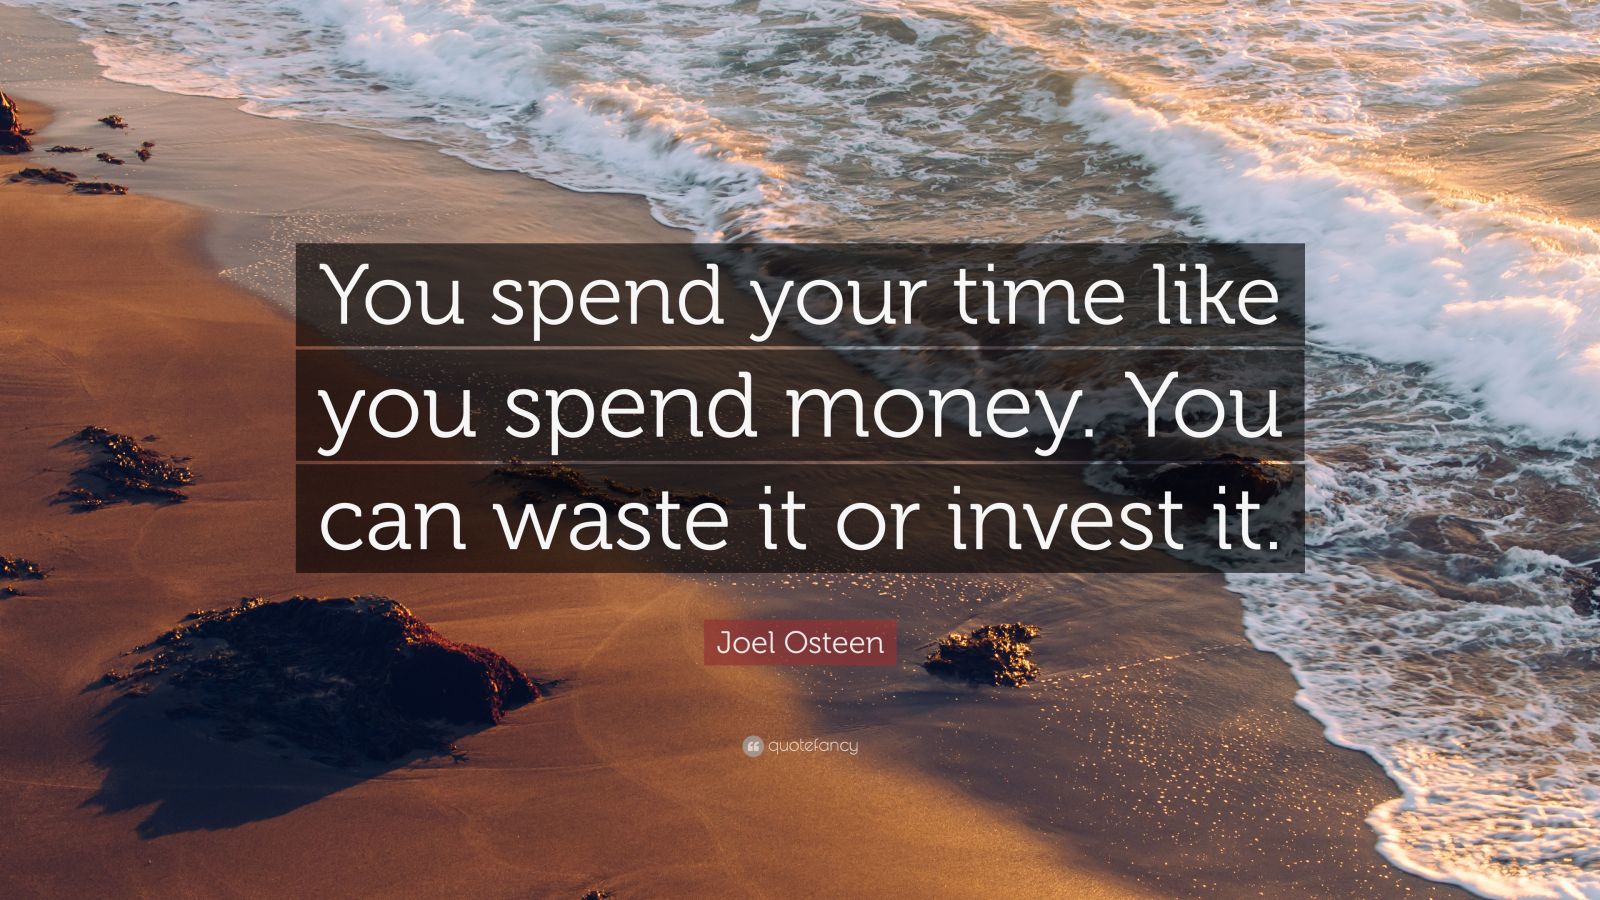 Joel Osteen quote about spending time and money